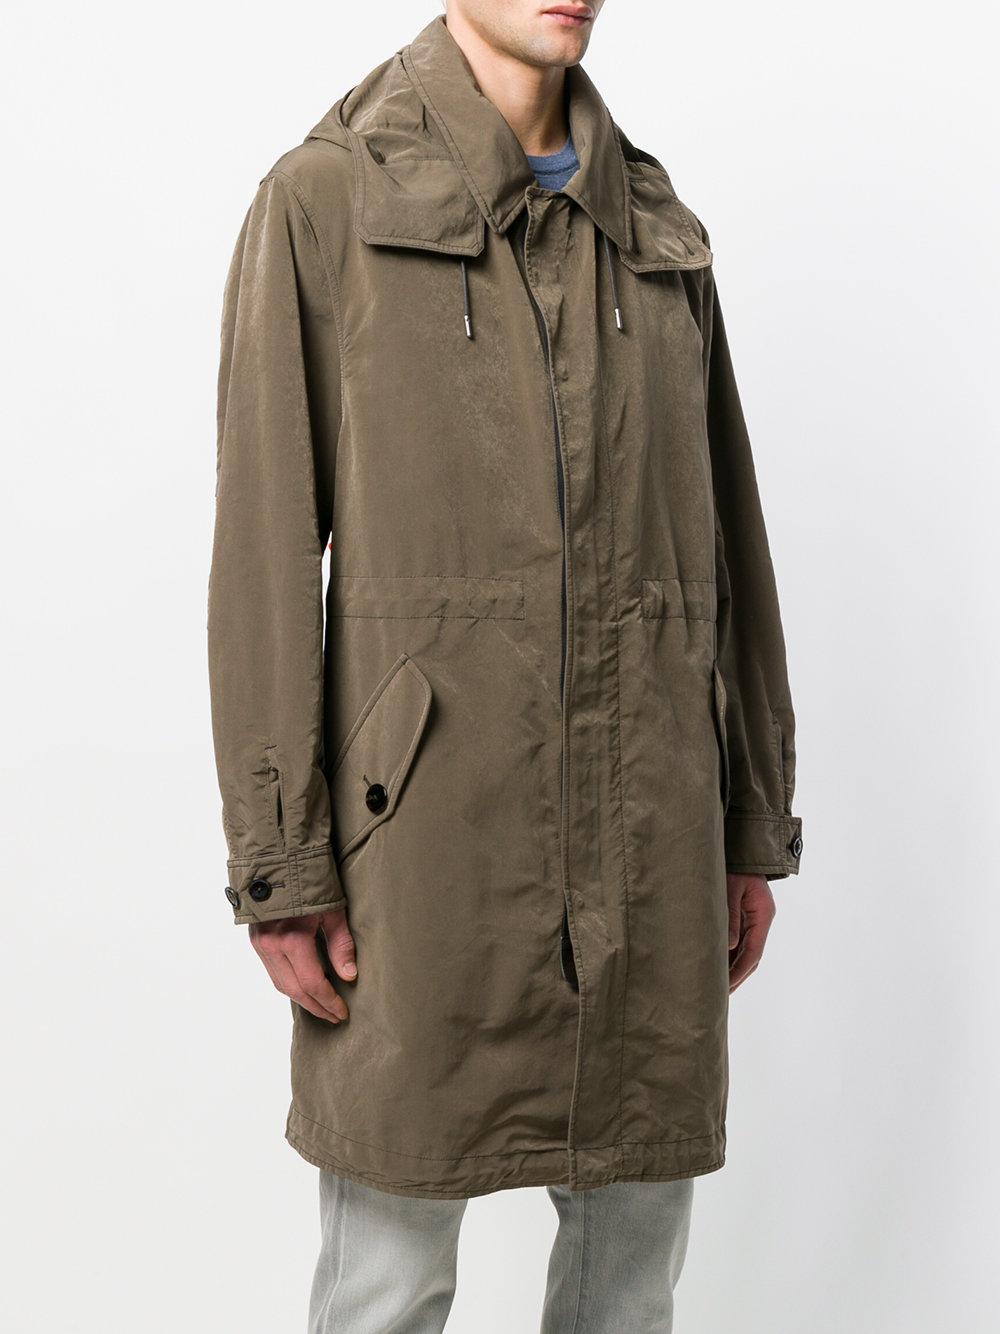 Tom Ford Synthetic Zipped Parka Coat in Green for Men - Lyst